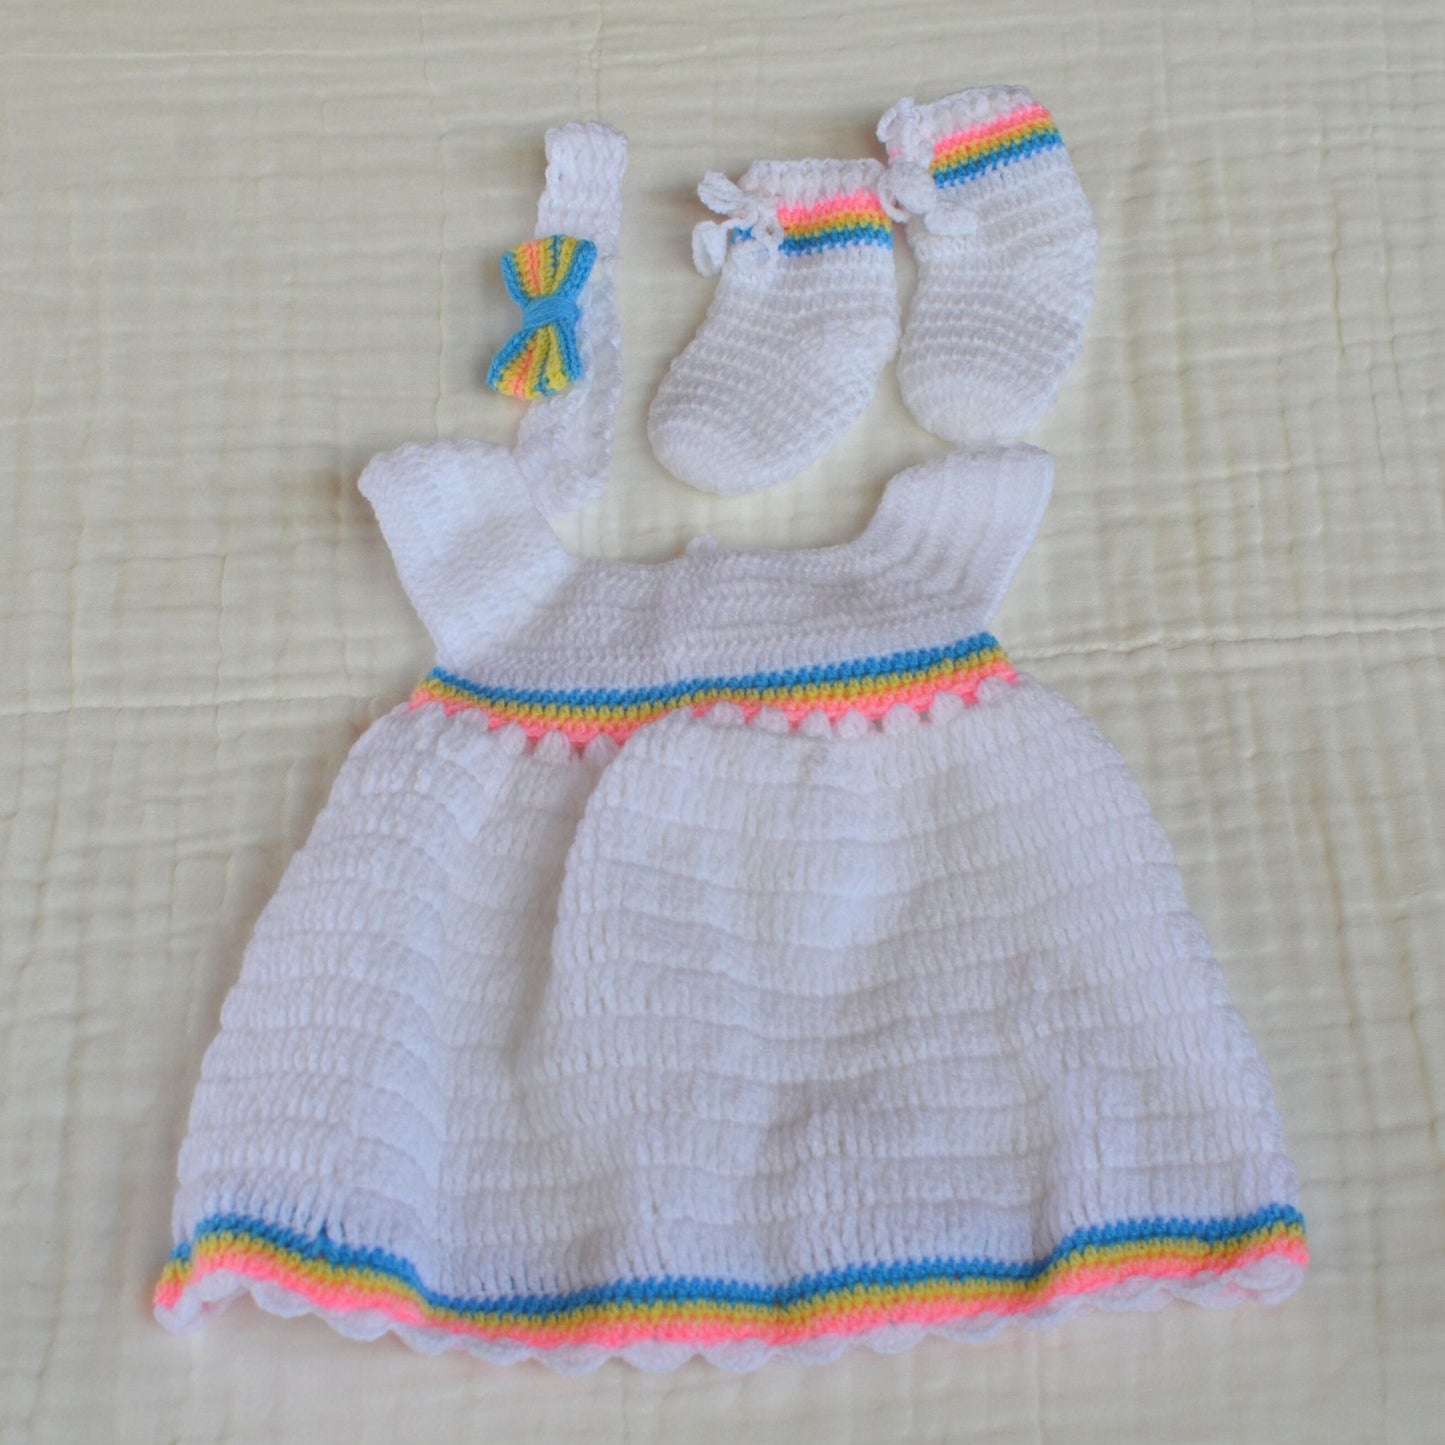 Crochet Baby Dress with Matching Hairband - 3 Month Size